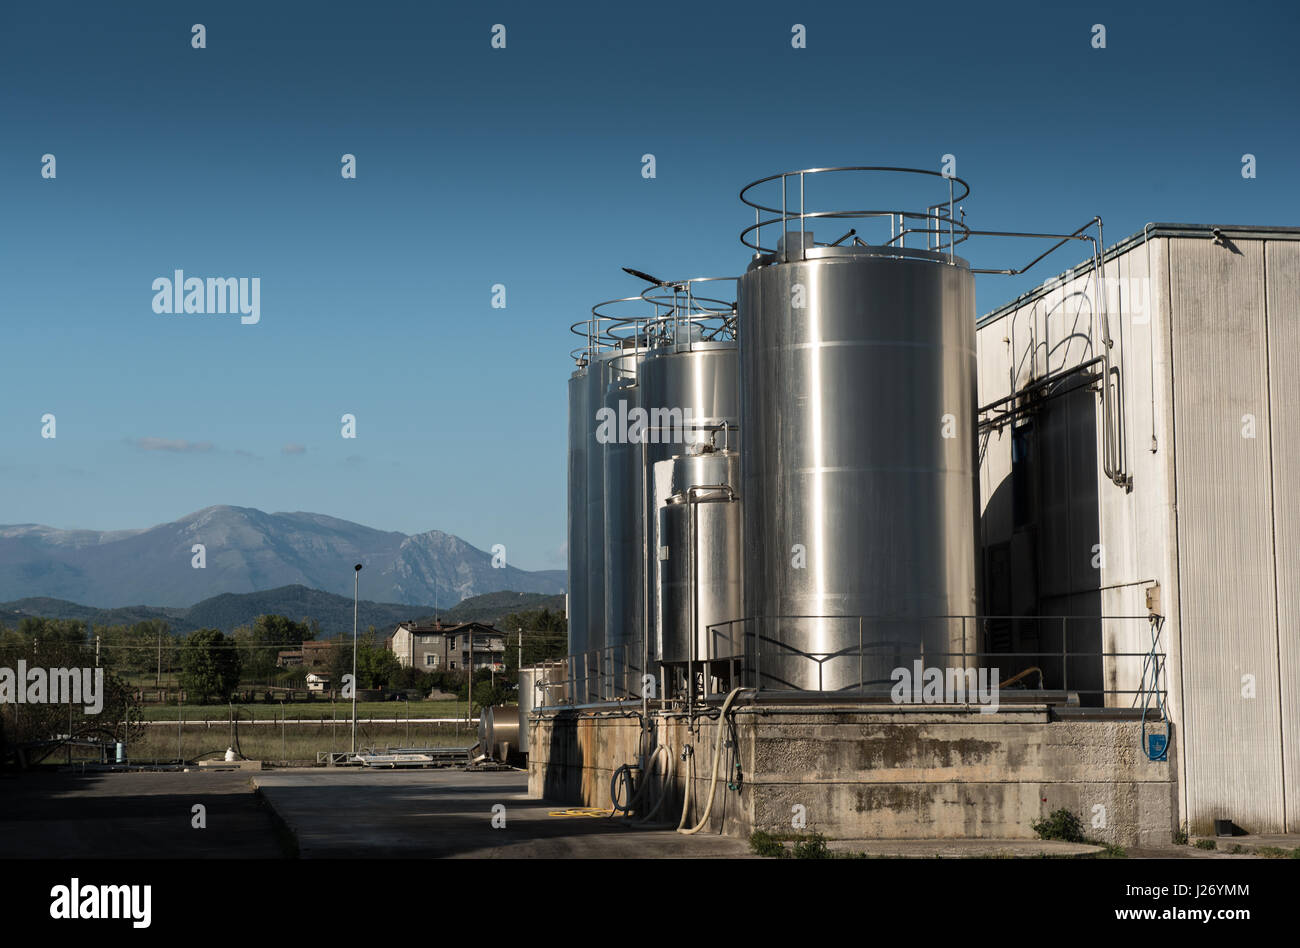 Industrial silos storage structures external view in mountainous location, blue cloudy sky Stock Photo